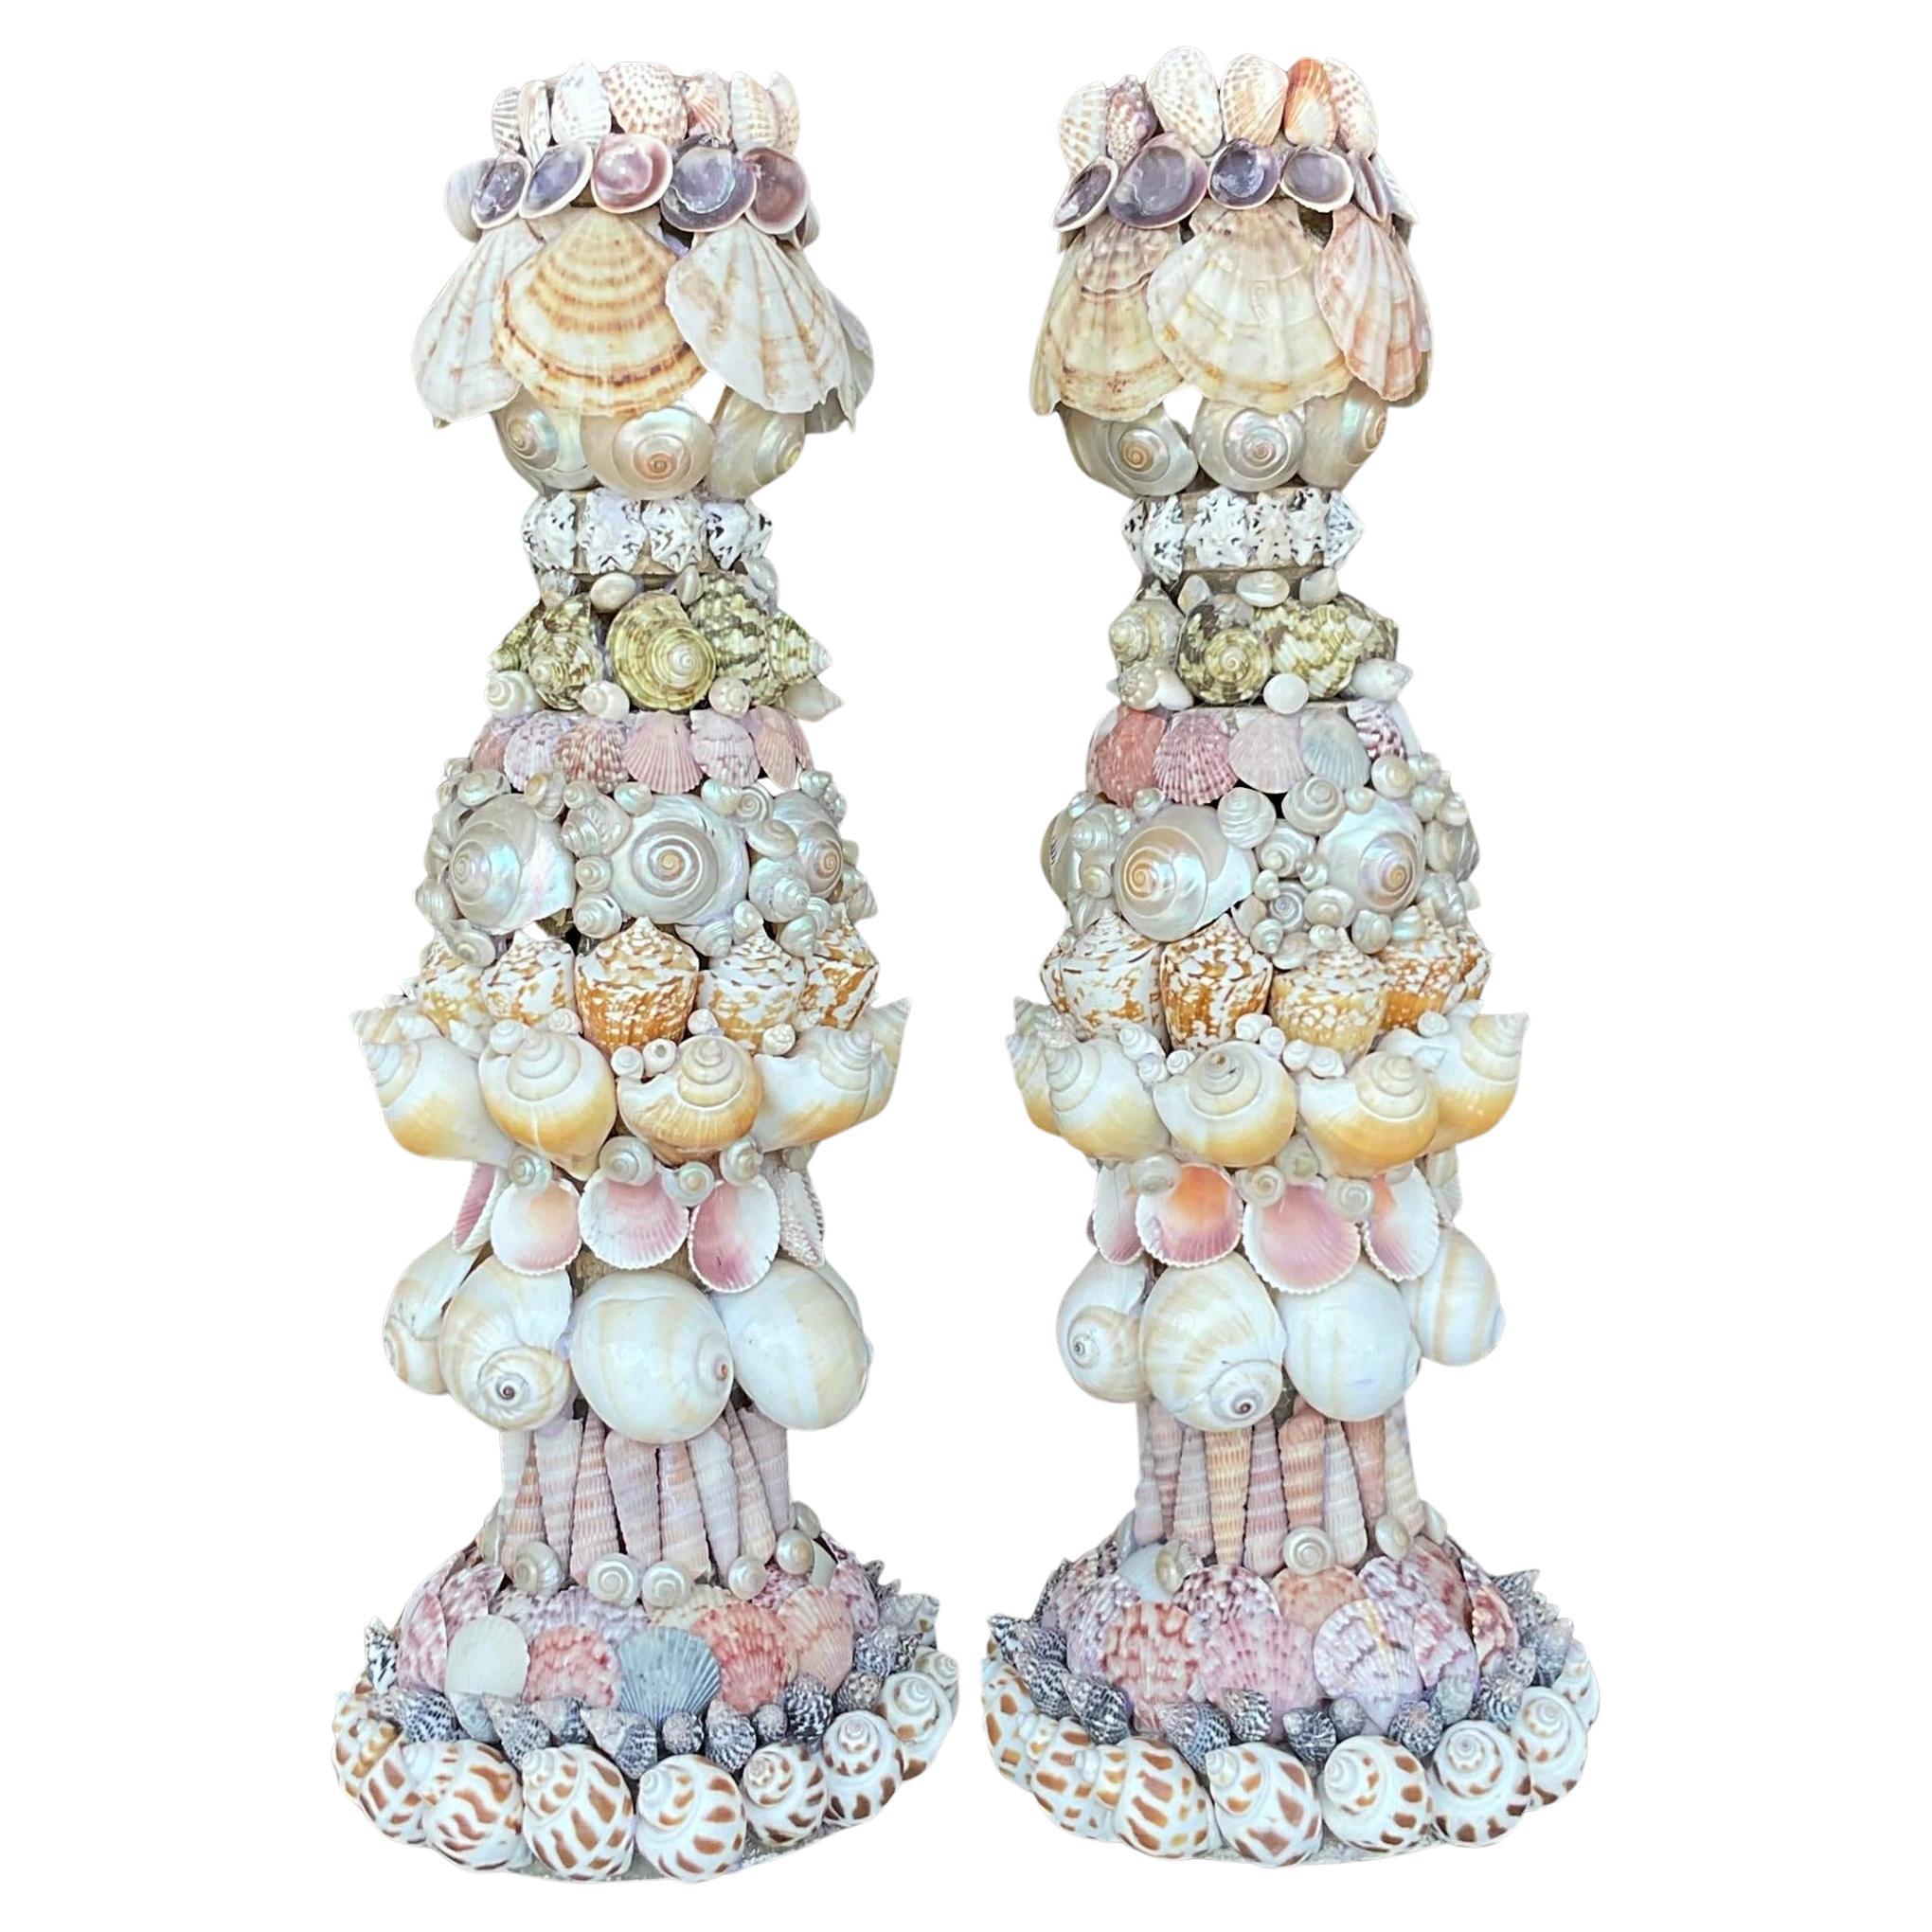 Vintage Coastal Shell Encrusted Candlesticks - a Pair For Sale